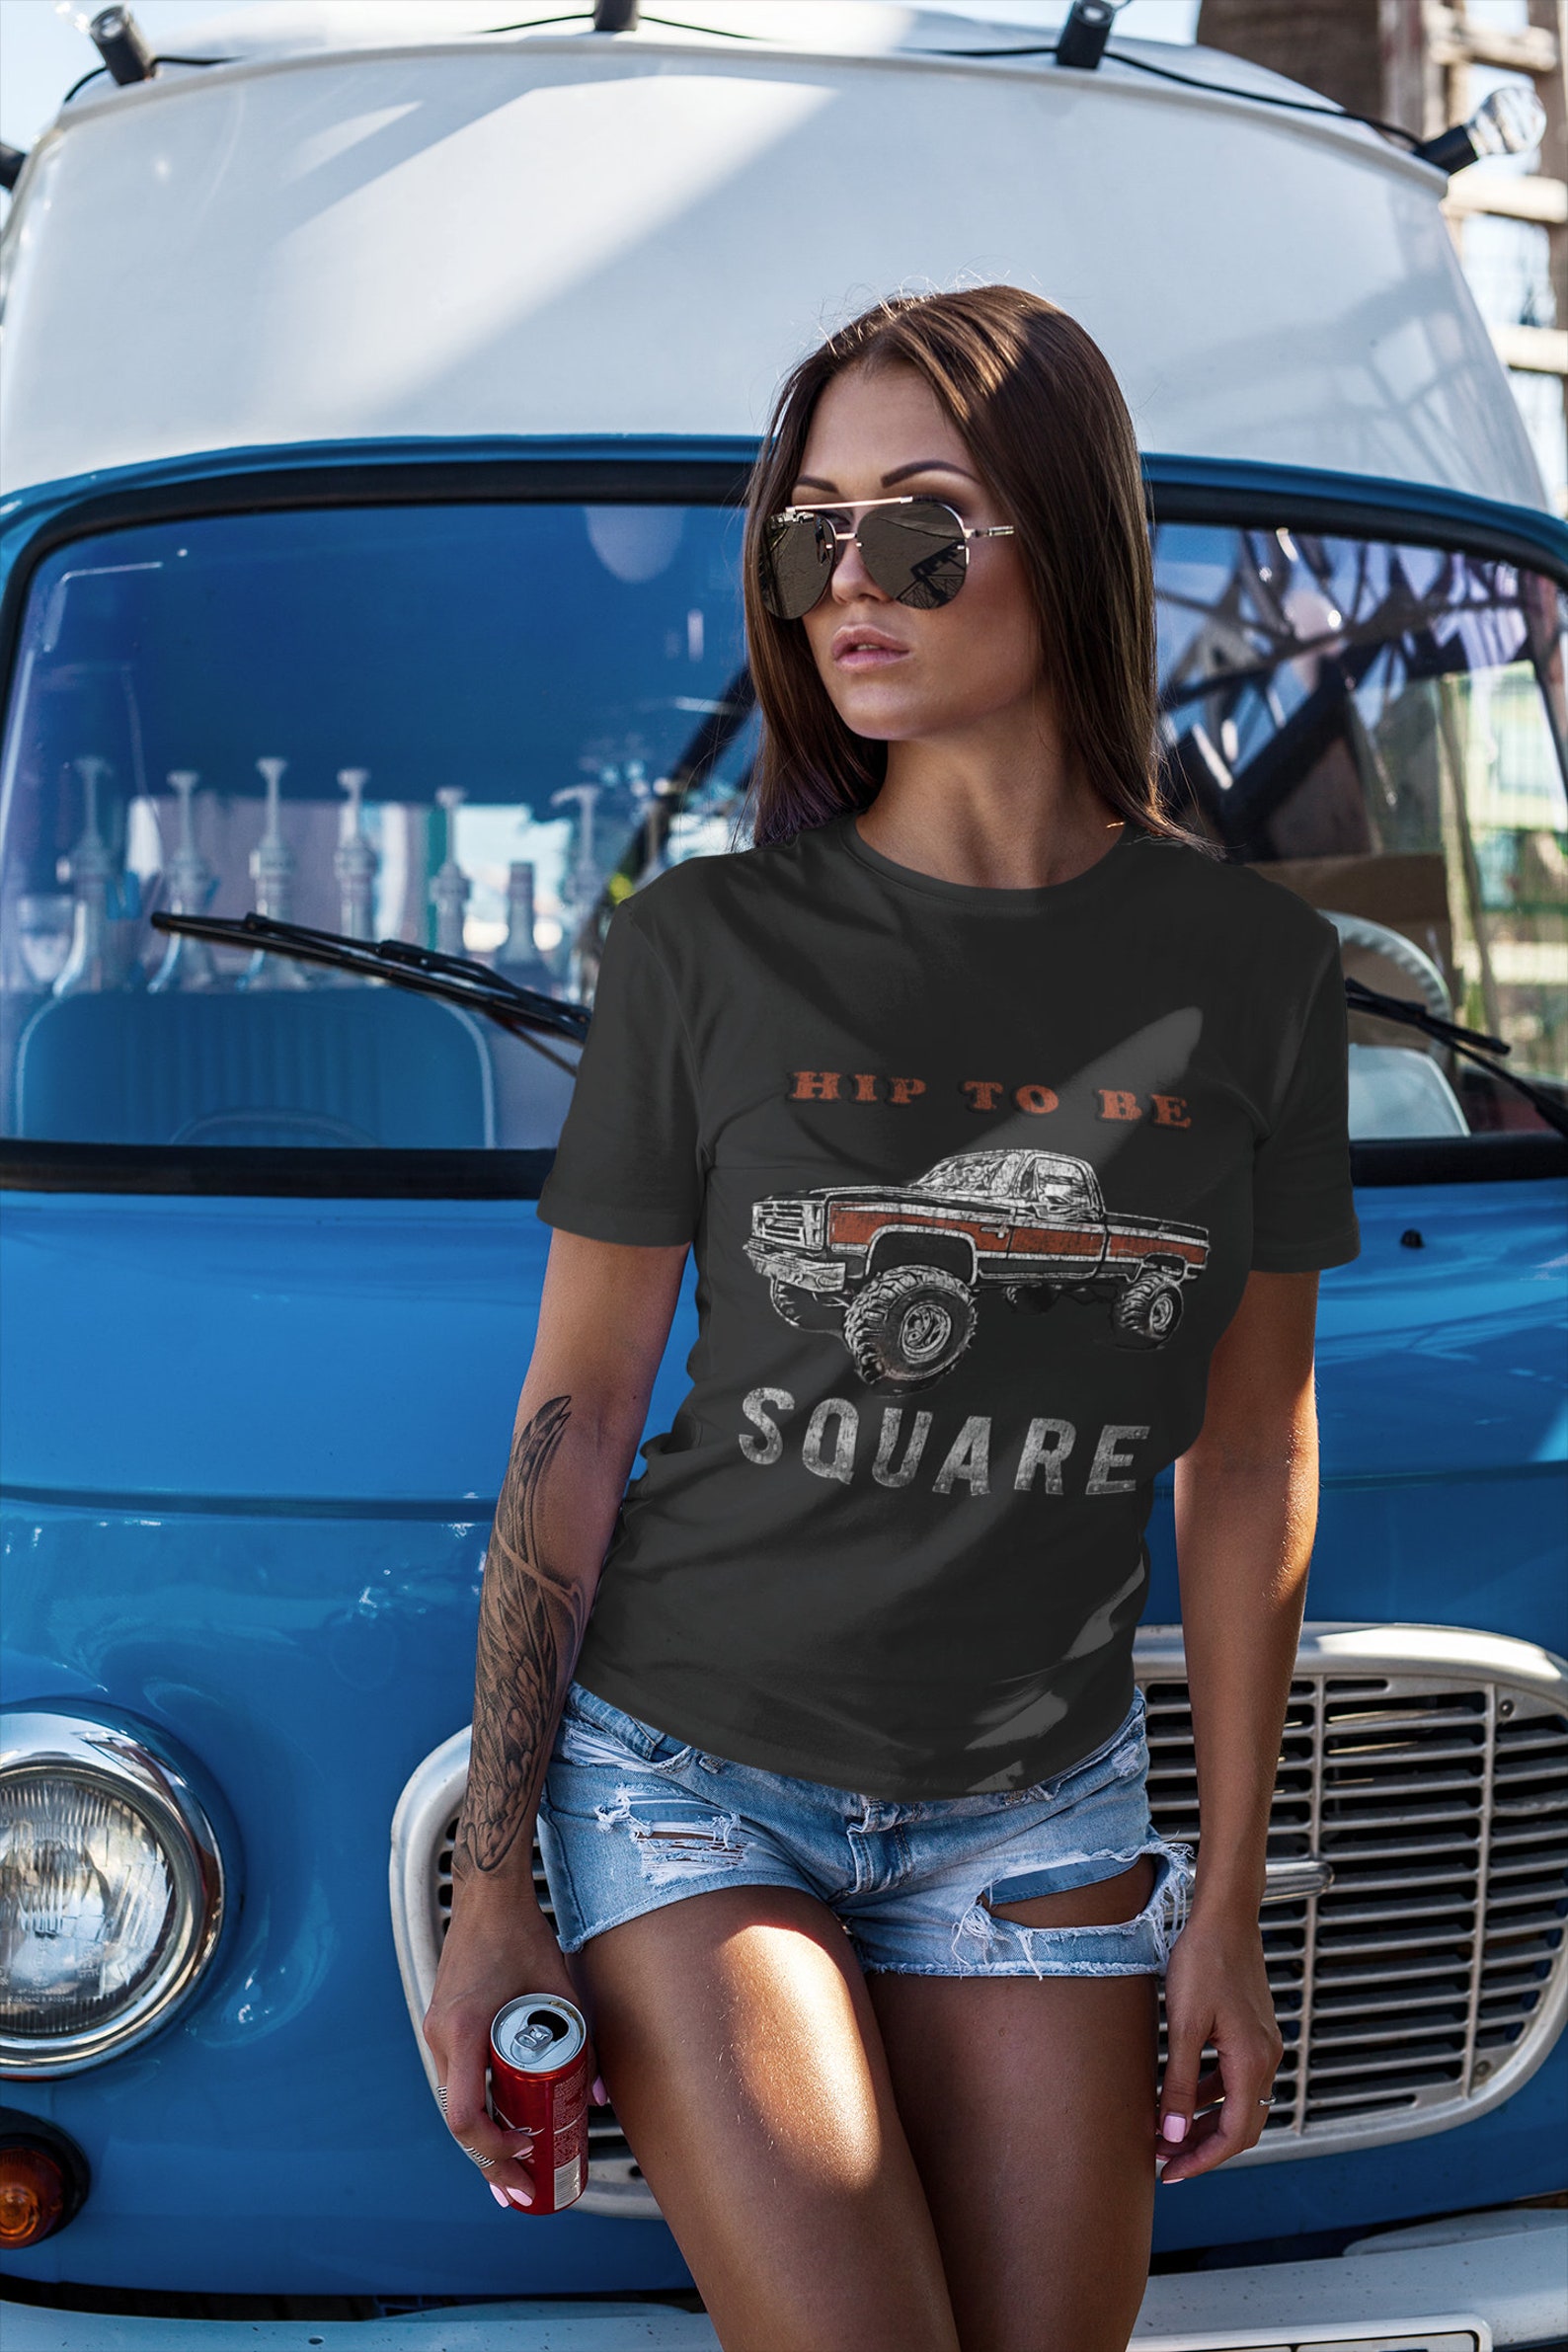 Vintage Chevy Hip To Be Square Body Lifted Truck T-shirt 4X4 | Etsy